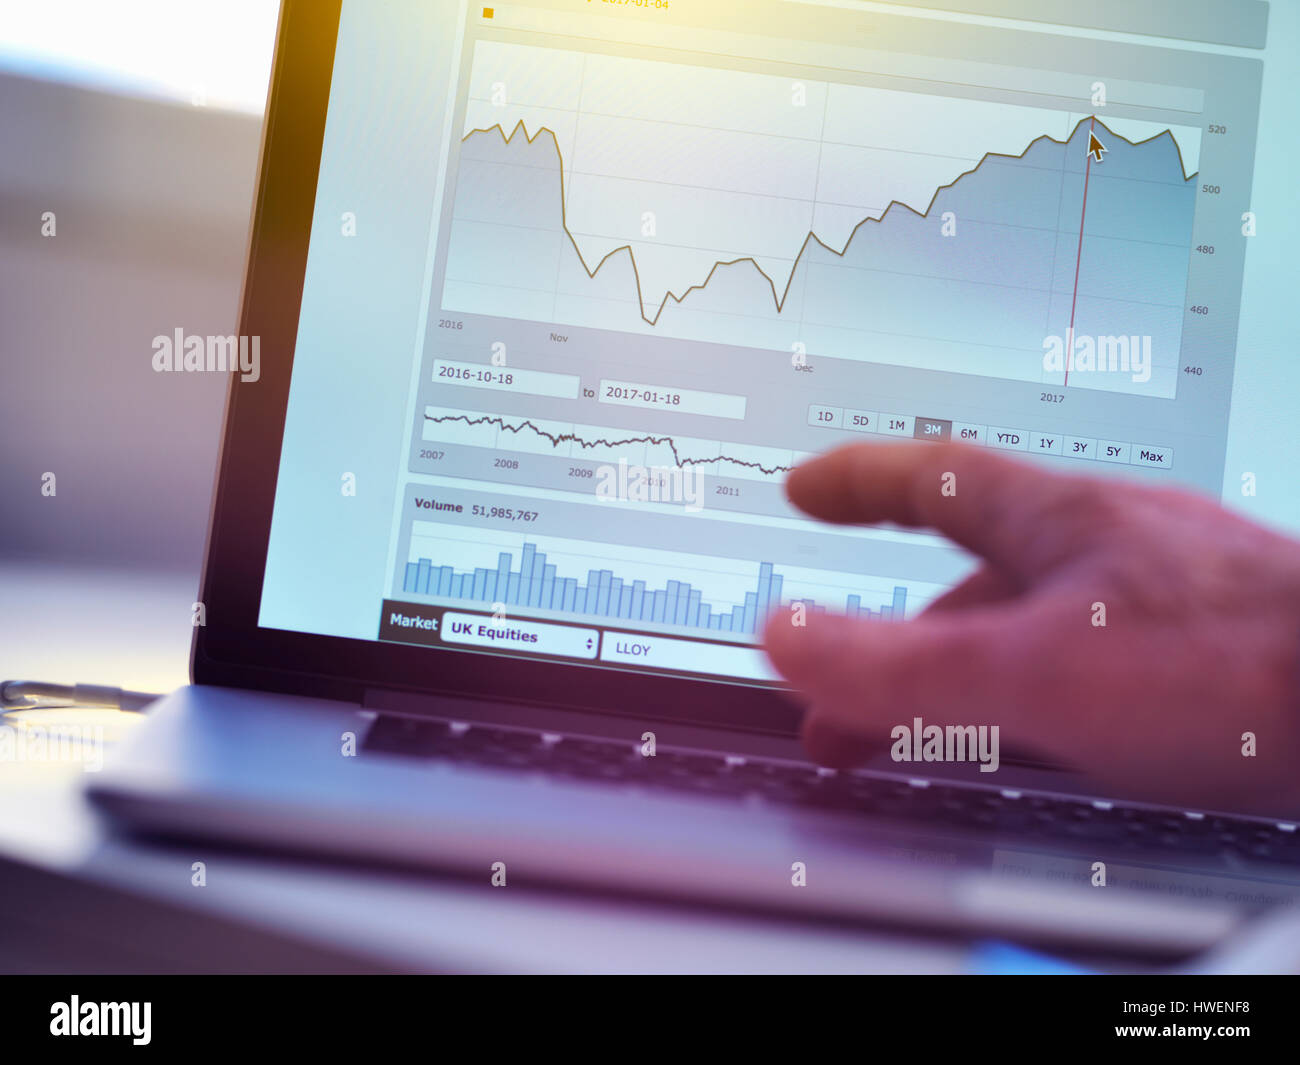 Investor viewing company share price market data on a laptop computer Stock Photo